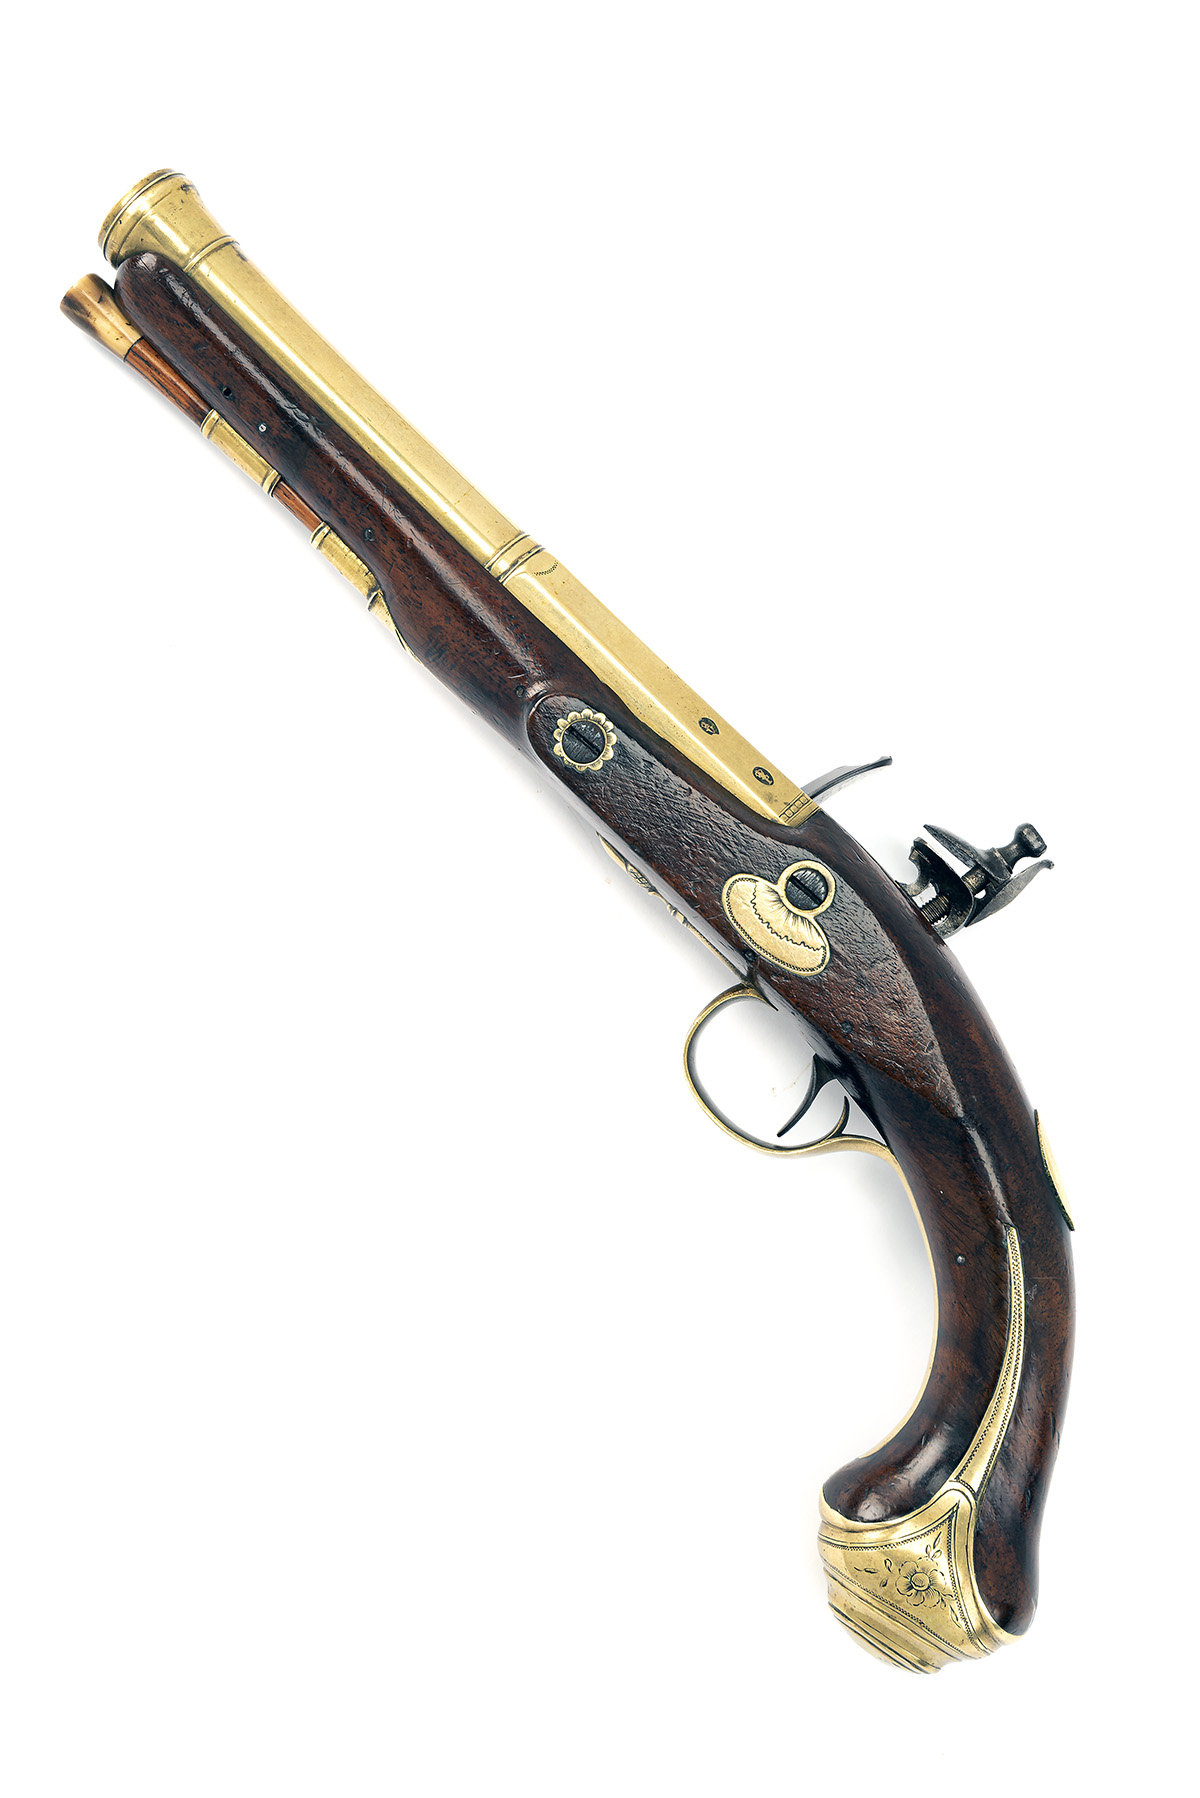 A .65 BRASS CANNON-BARRELLED FLINTLOCK HOLSTER PISTOL BY J. & W. RICHARDS, CIRCA 1808, no visible - Image 2 of 4